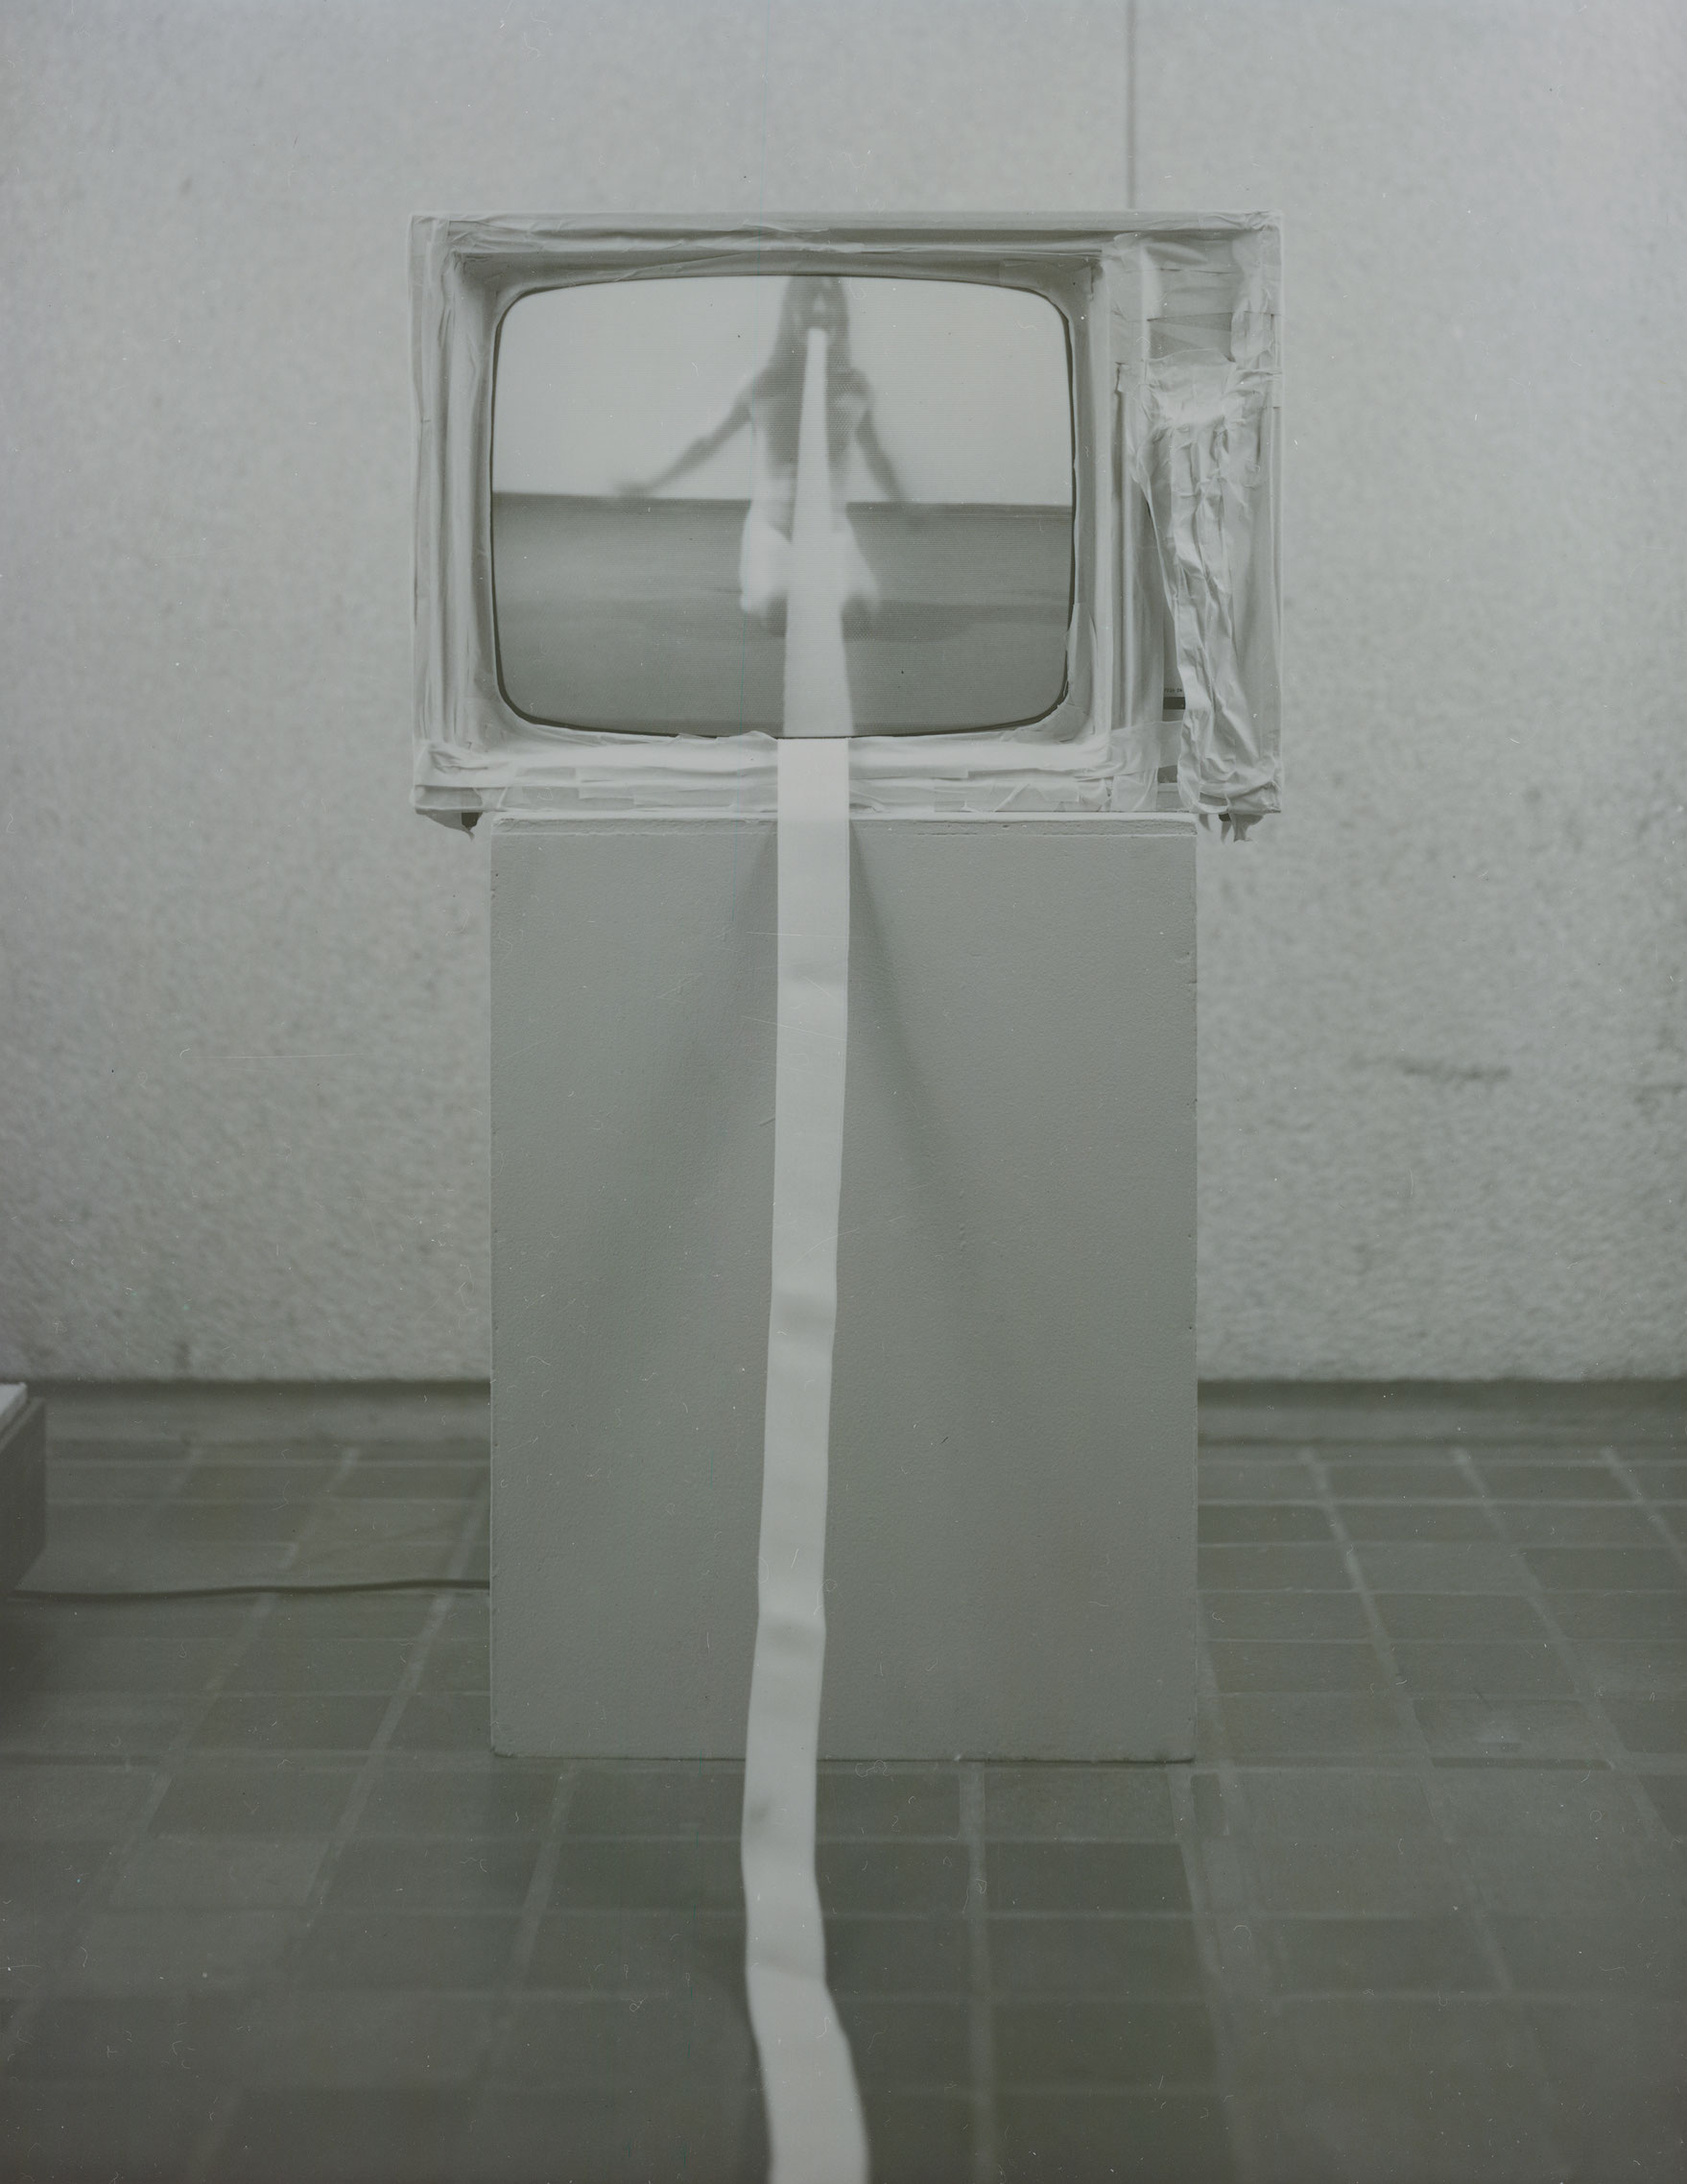 Propos type, 1977, Black and white video, mute, 30 min, television, masking tape and elastic tape.